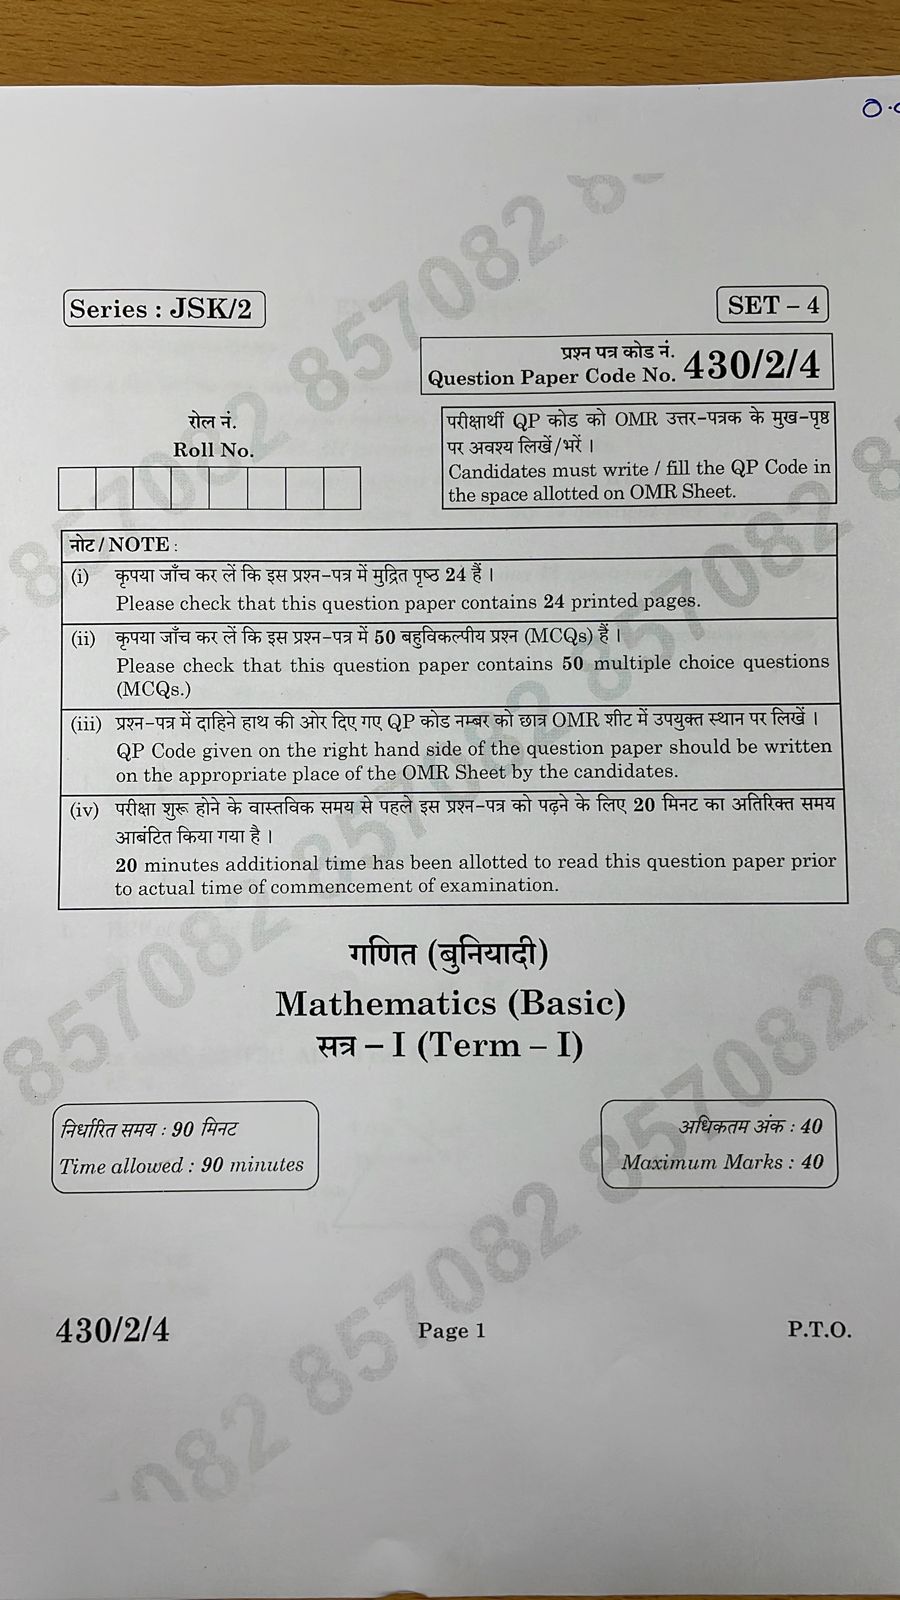 cbse sample paper 2021 class 10 maths standard answer key, the decimal expansion of the rational number, sample paper class 10 2021 maths basic with answers, cbse class 10 maths question paper 2021 with solutions pdf, sample paper class 10 2021 term 1 maths basic with answers